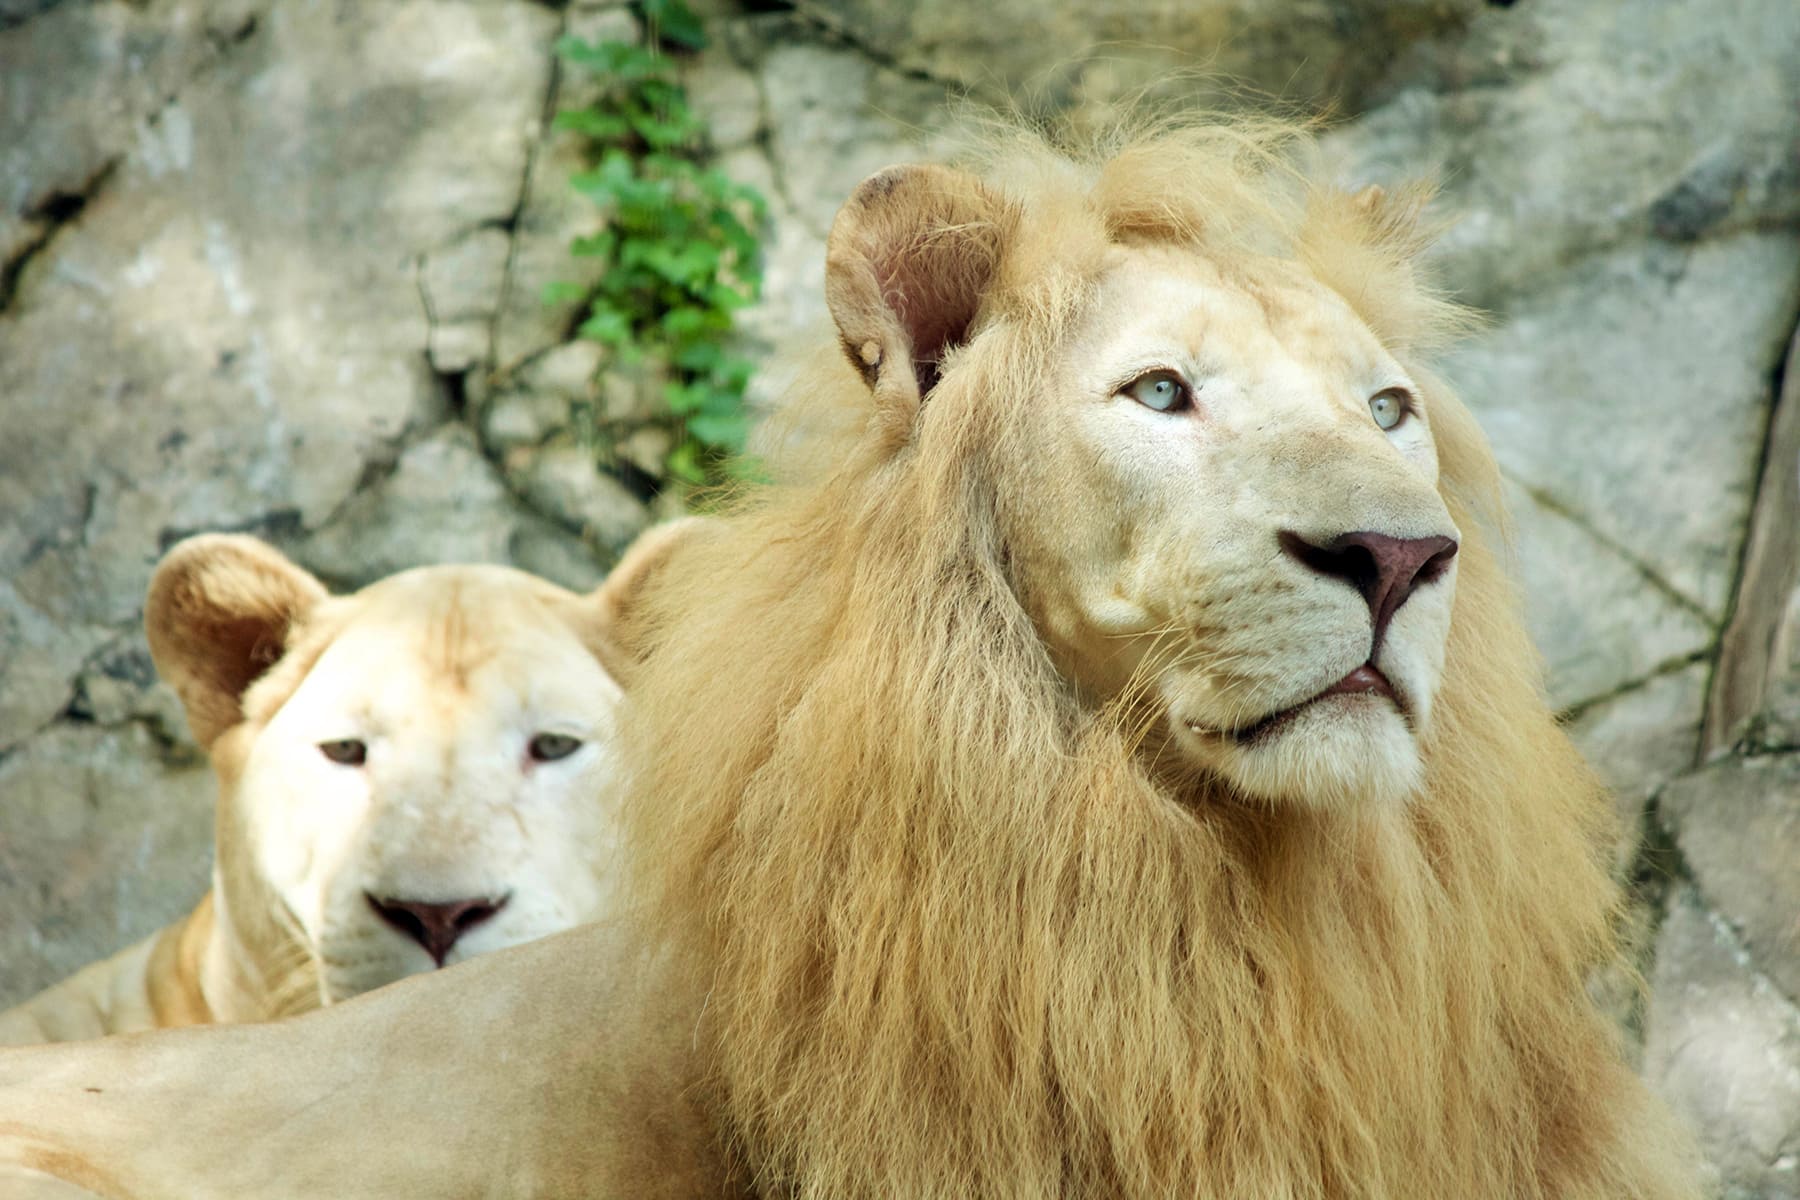 Not only white tigers, you can also meet the King and Queen of the Jungle – the mighty white lions, Zola & Zuri!